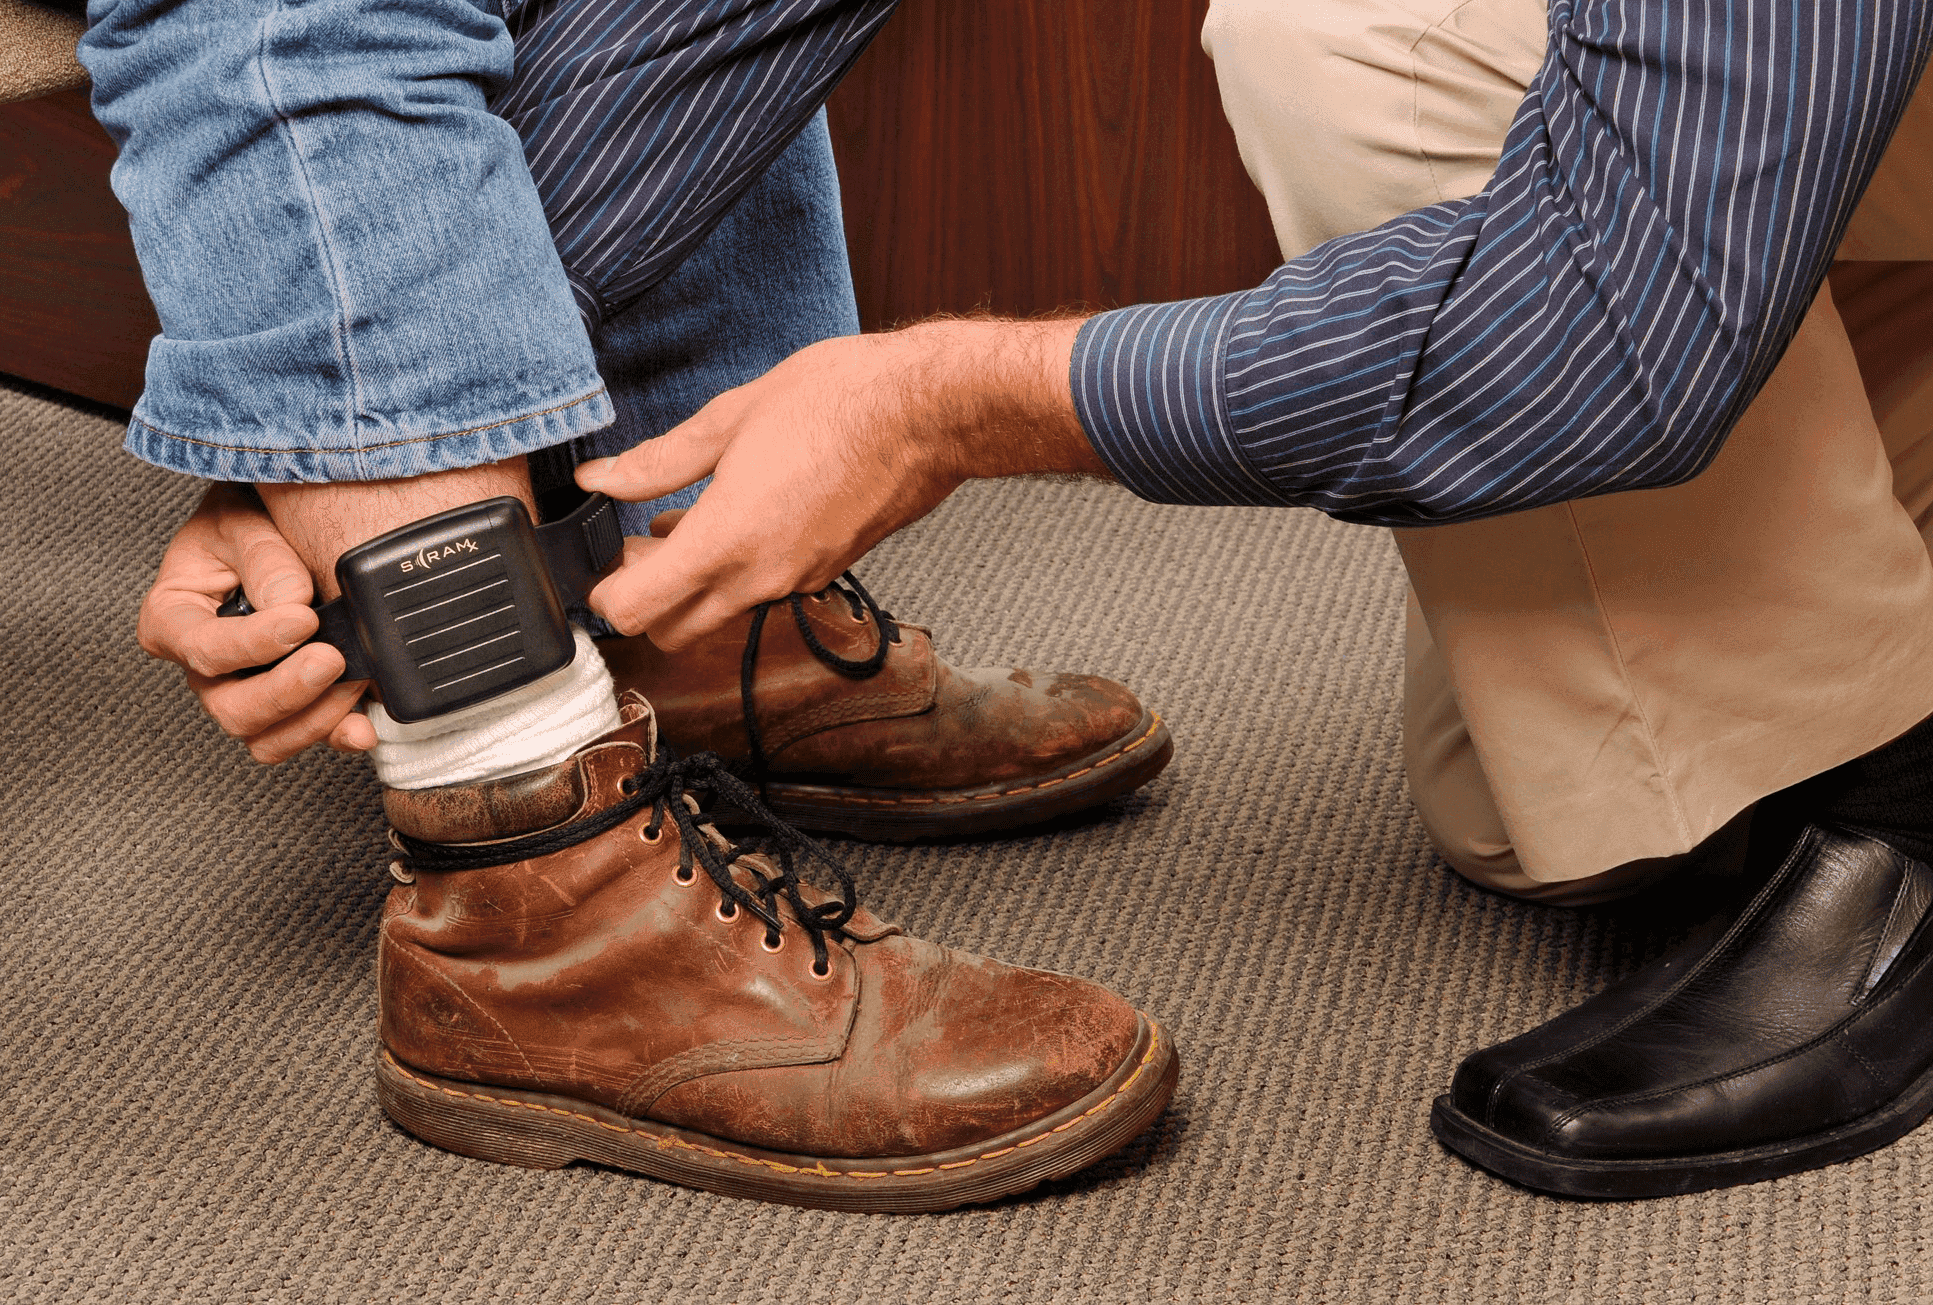 How to block a GPS signal on an ankle monitor - Quora